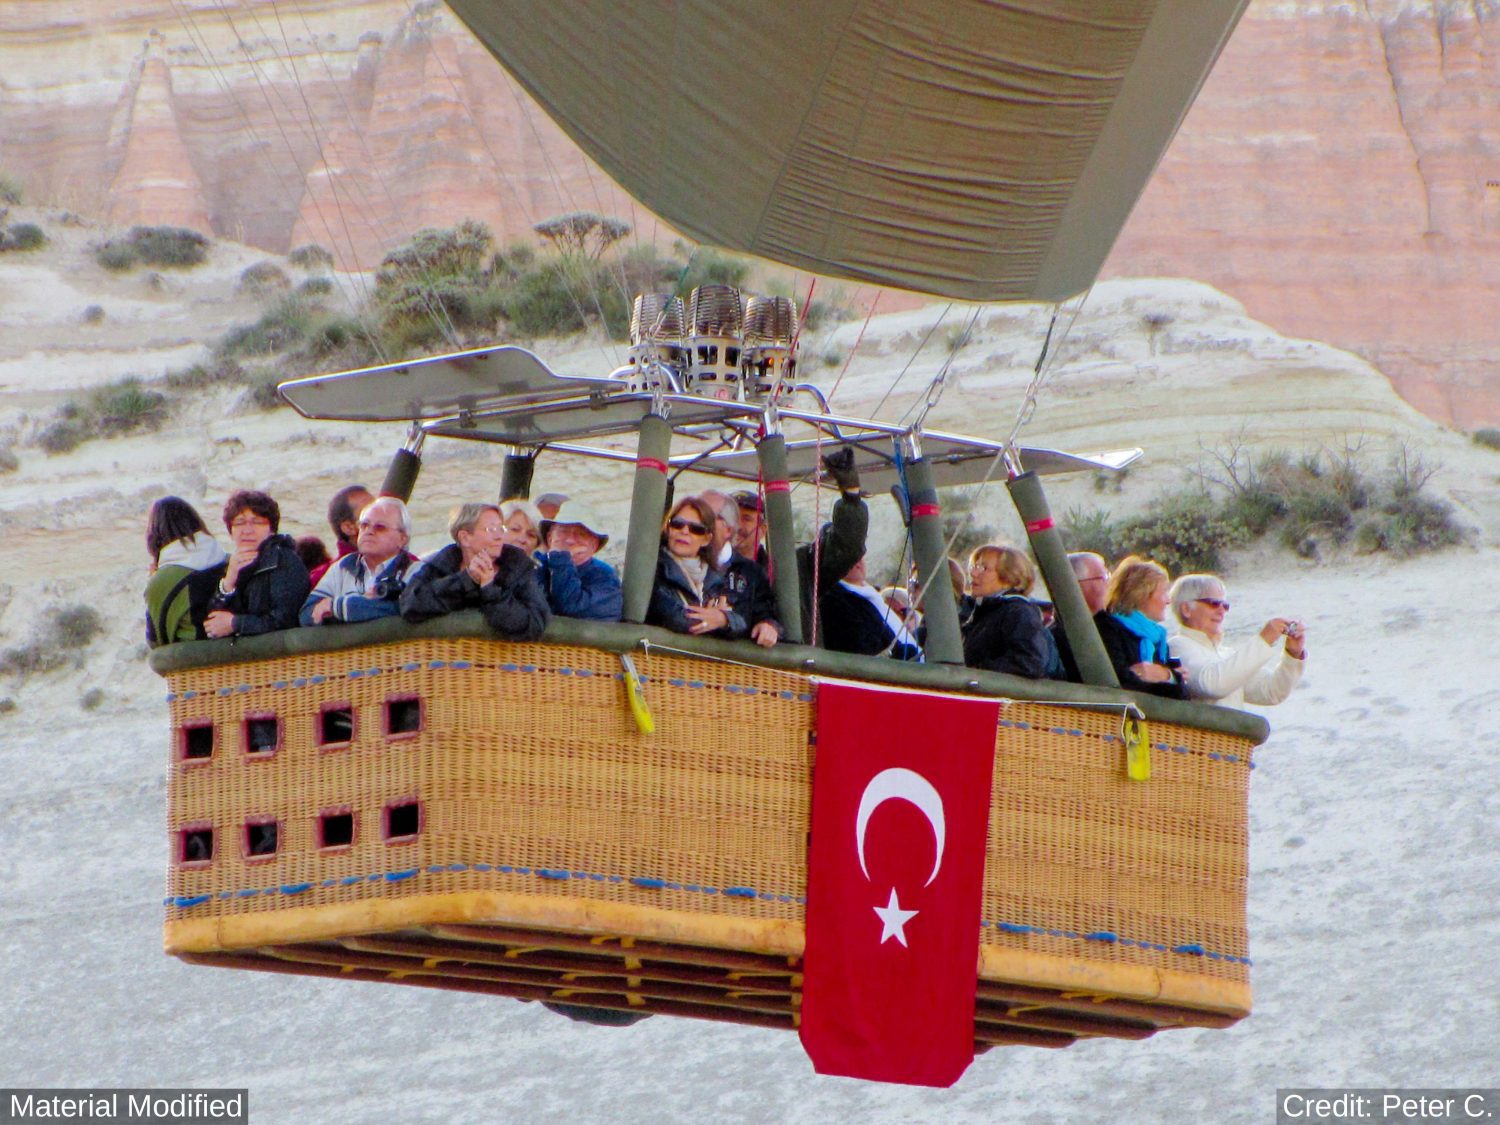 Turkey: See & Experience Almost it ALL in 10 Days, 1st Class Custom Tours